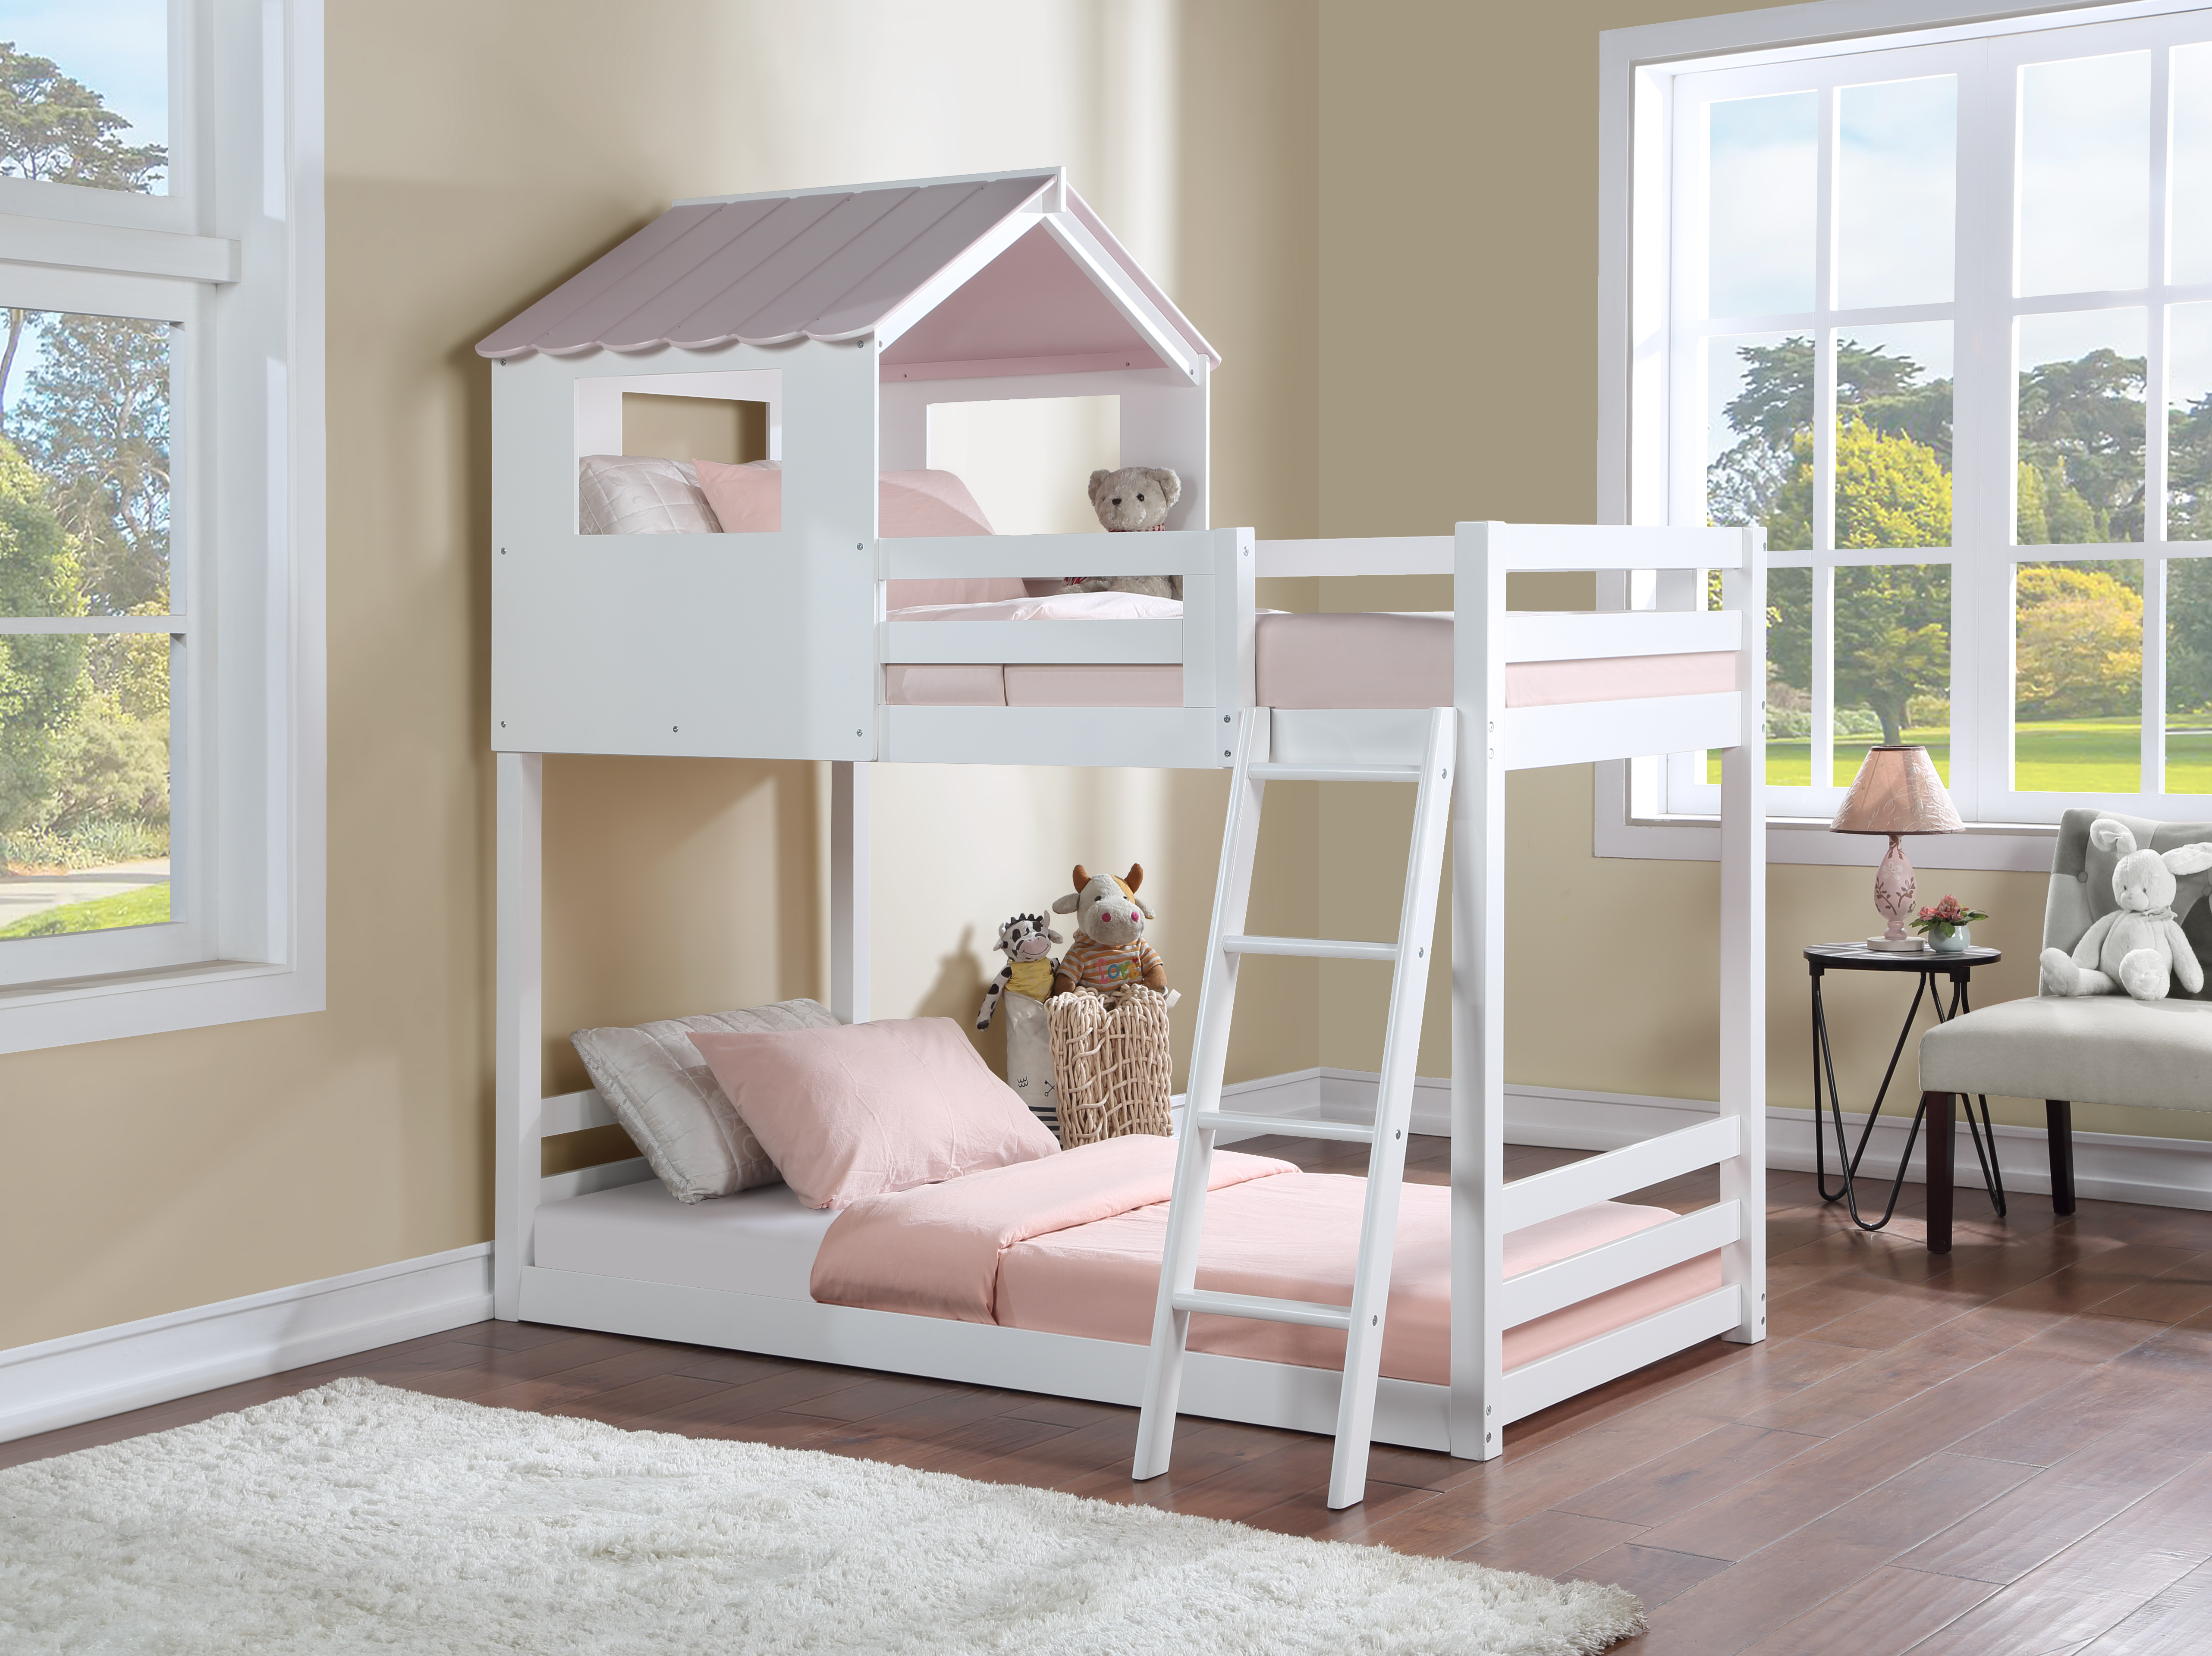 ACME Solenne T/T Bunk Bed, White Pink Finish